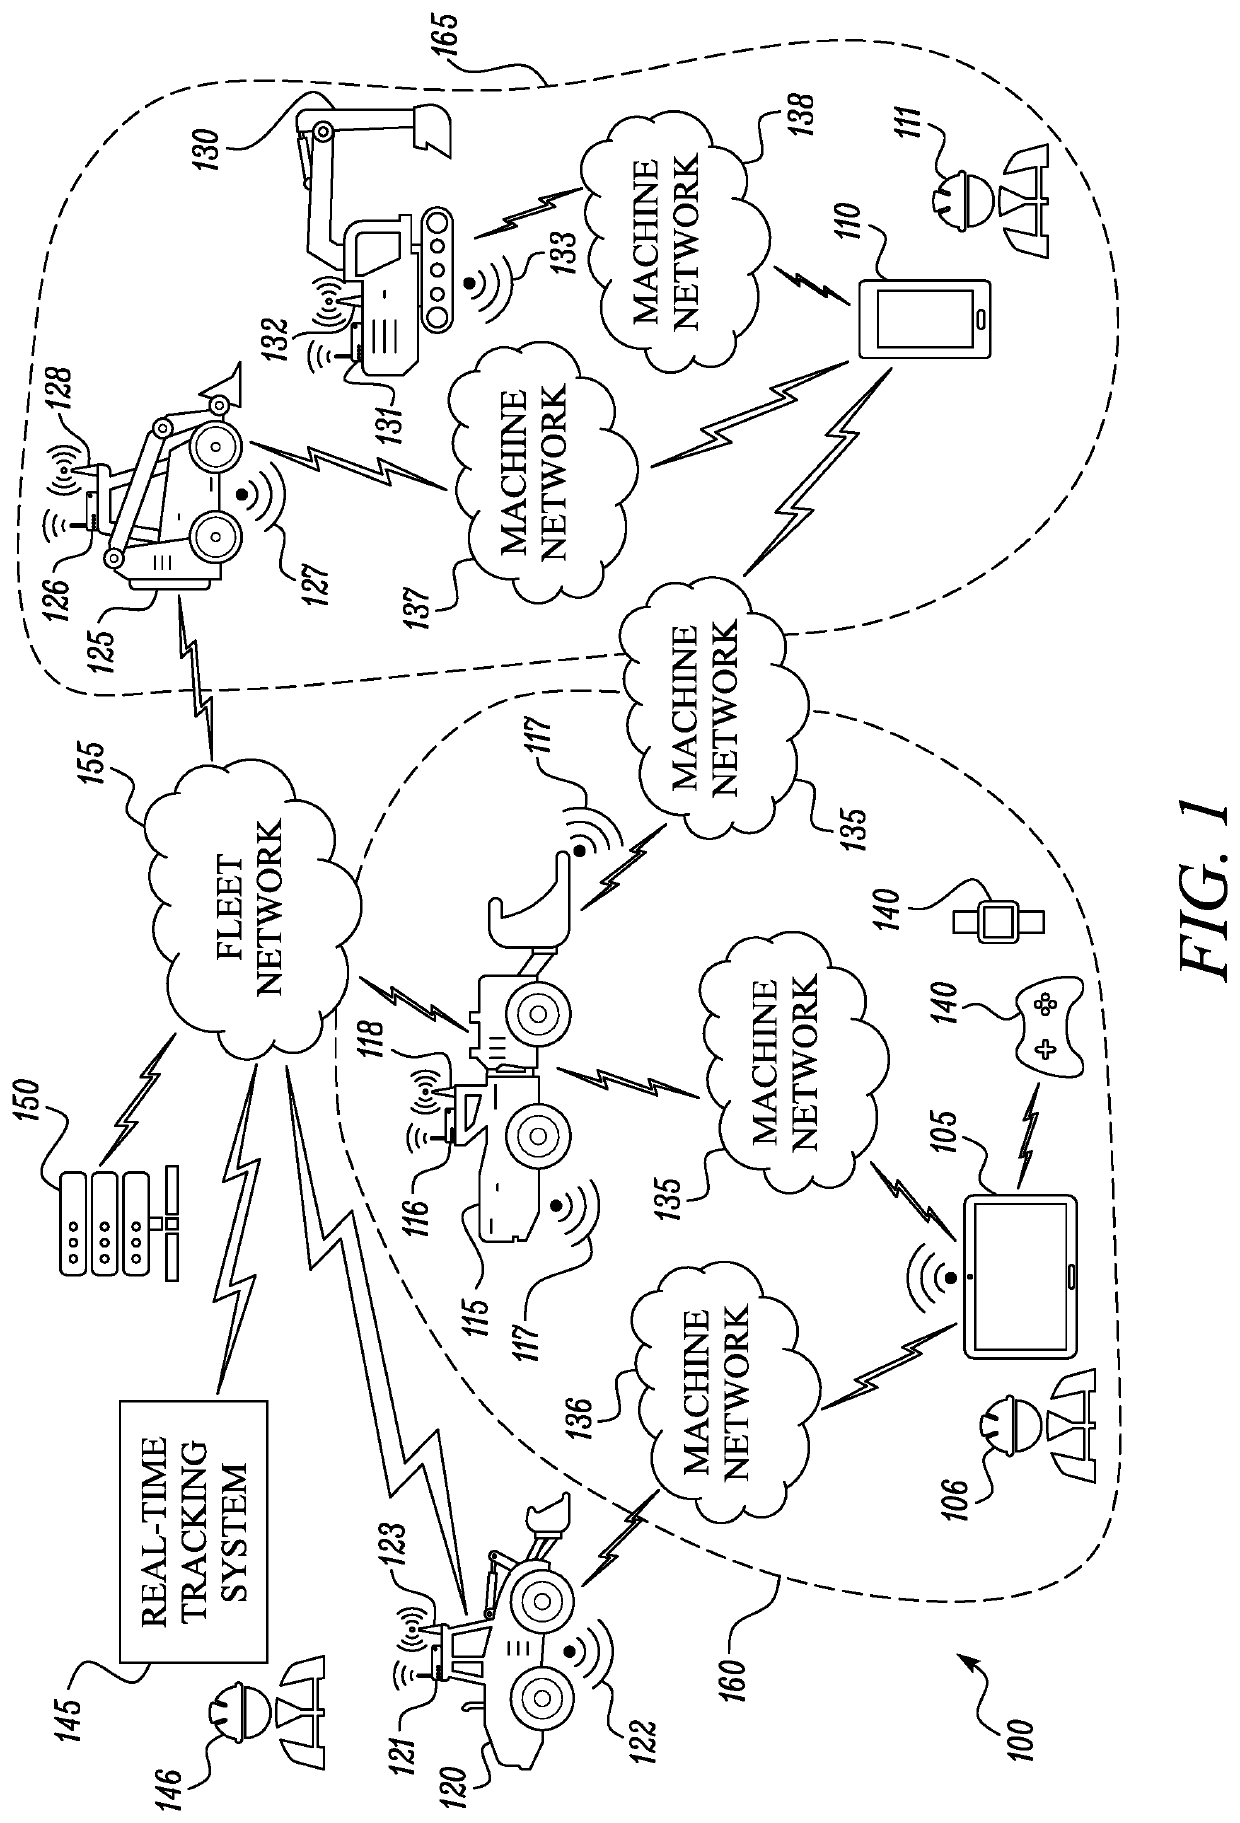 Method for remote operation of machines using a mobile device